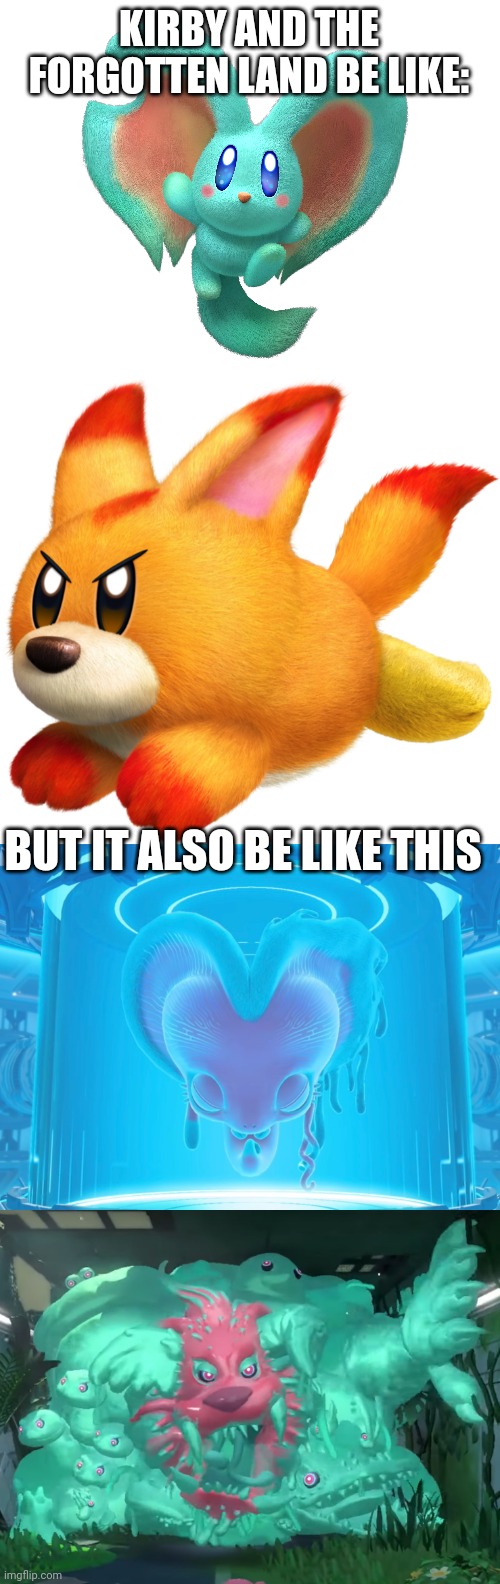 It started out SO CUTE until THOSE TWO |  KIRBY AND THE FORGOTTEN LAND BE LIKE:; BUT IT ALSO BE LIKE THIS | image tagged in kirby | made w/ Imgflip meme maker